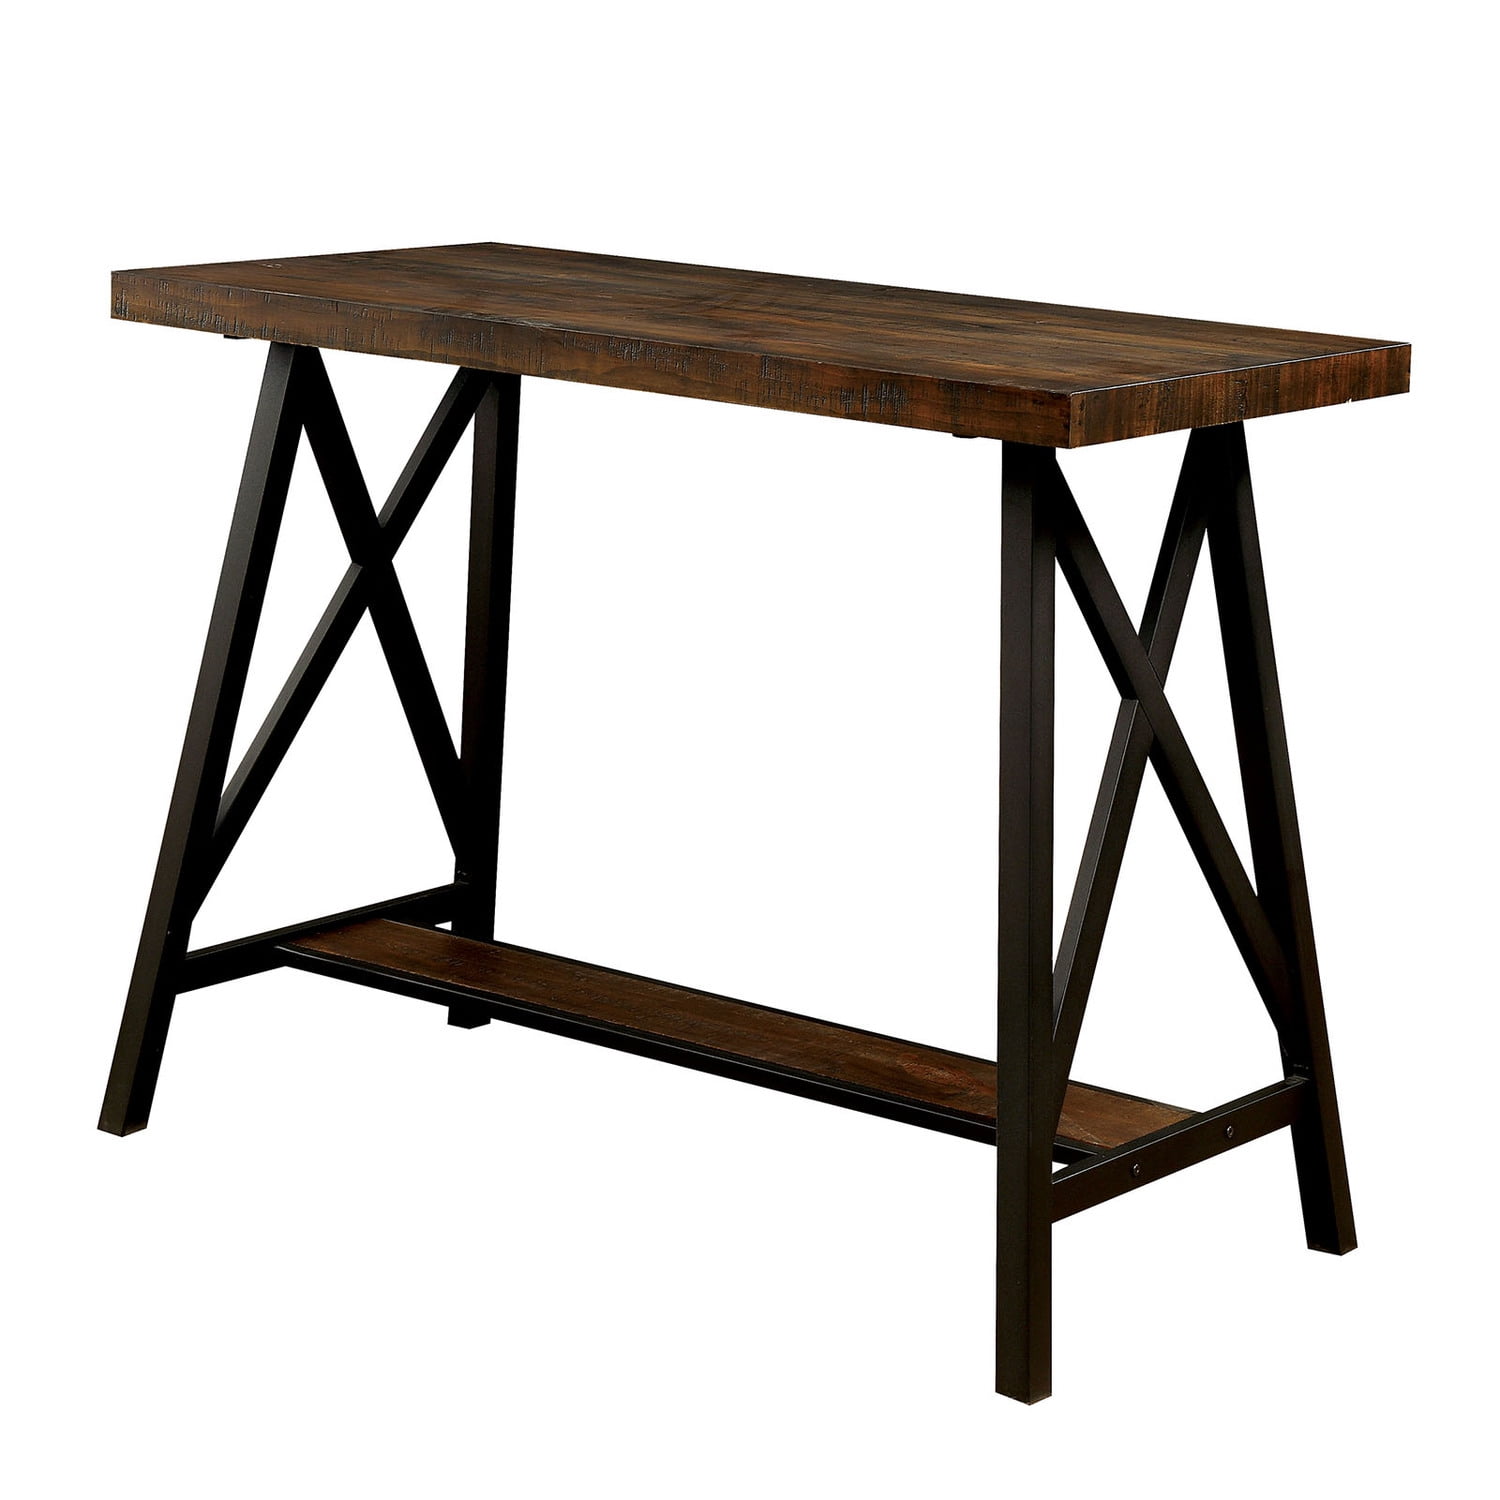 Benzara Wooden Counter Height Table With Angled Metal Legs Black And